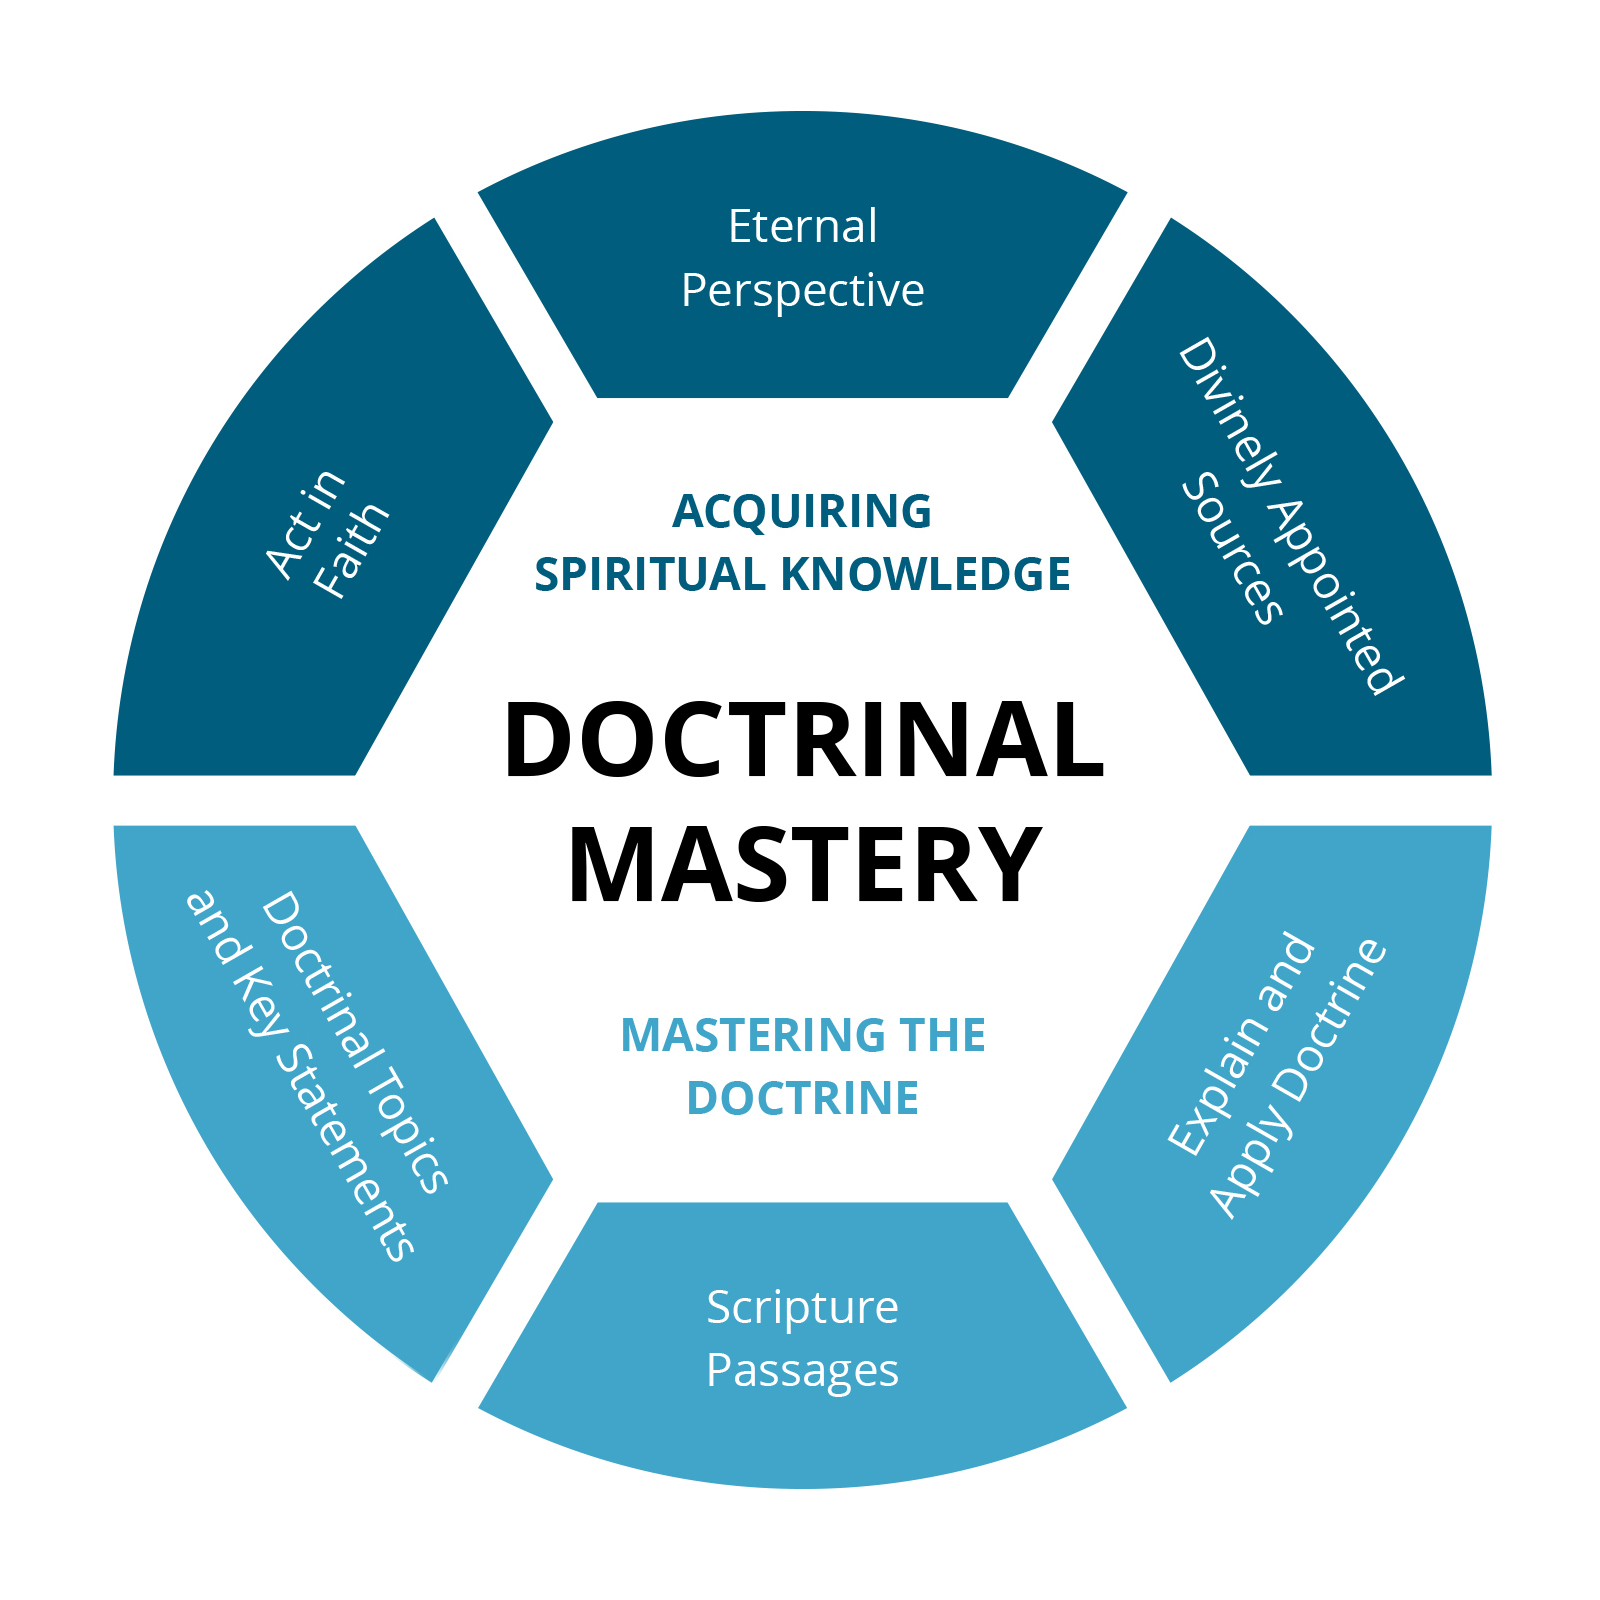 A wheel-shaped graphic representing the principles of the Doctrinal Mastery curriculum.